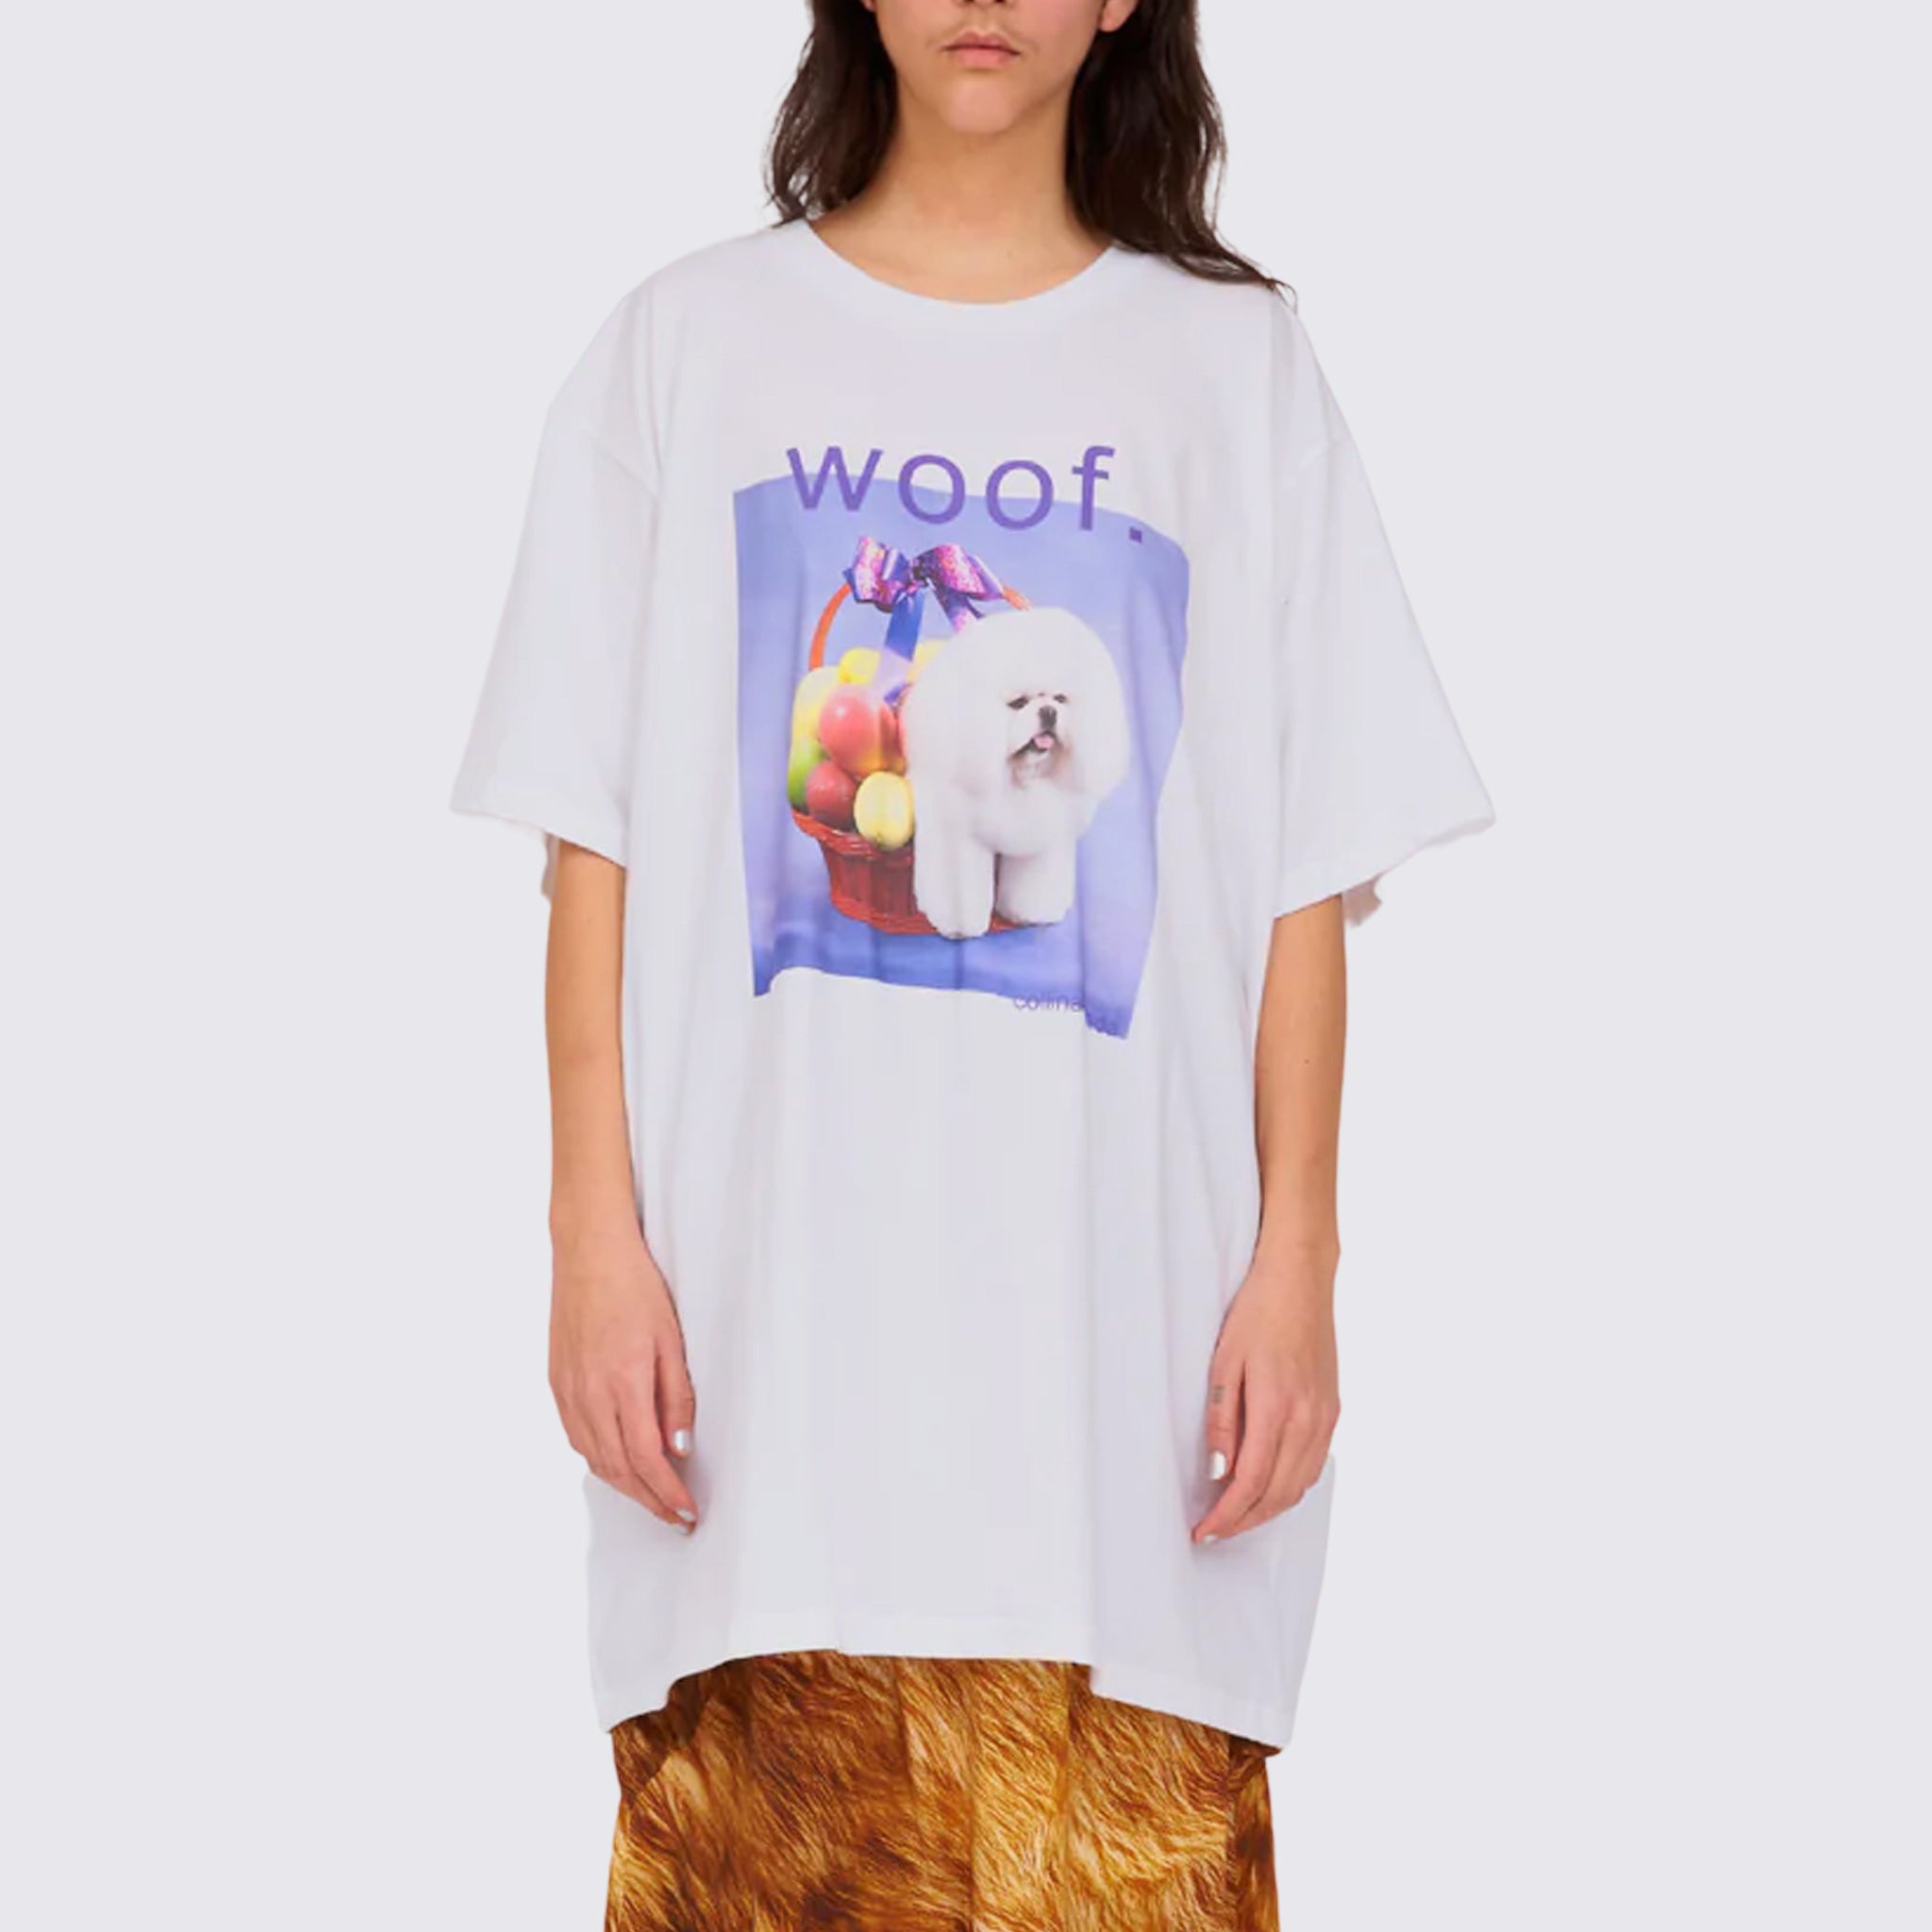 A model wears the XL size of the Graphic Tee in this season's WOOF print, featuring a small fluffy white dog sitting in a fruit basket, alternate view.